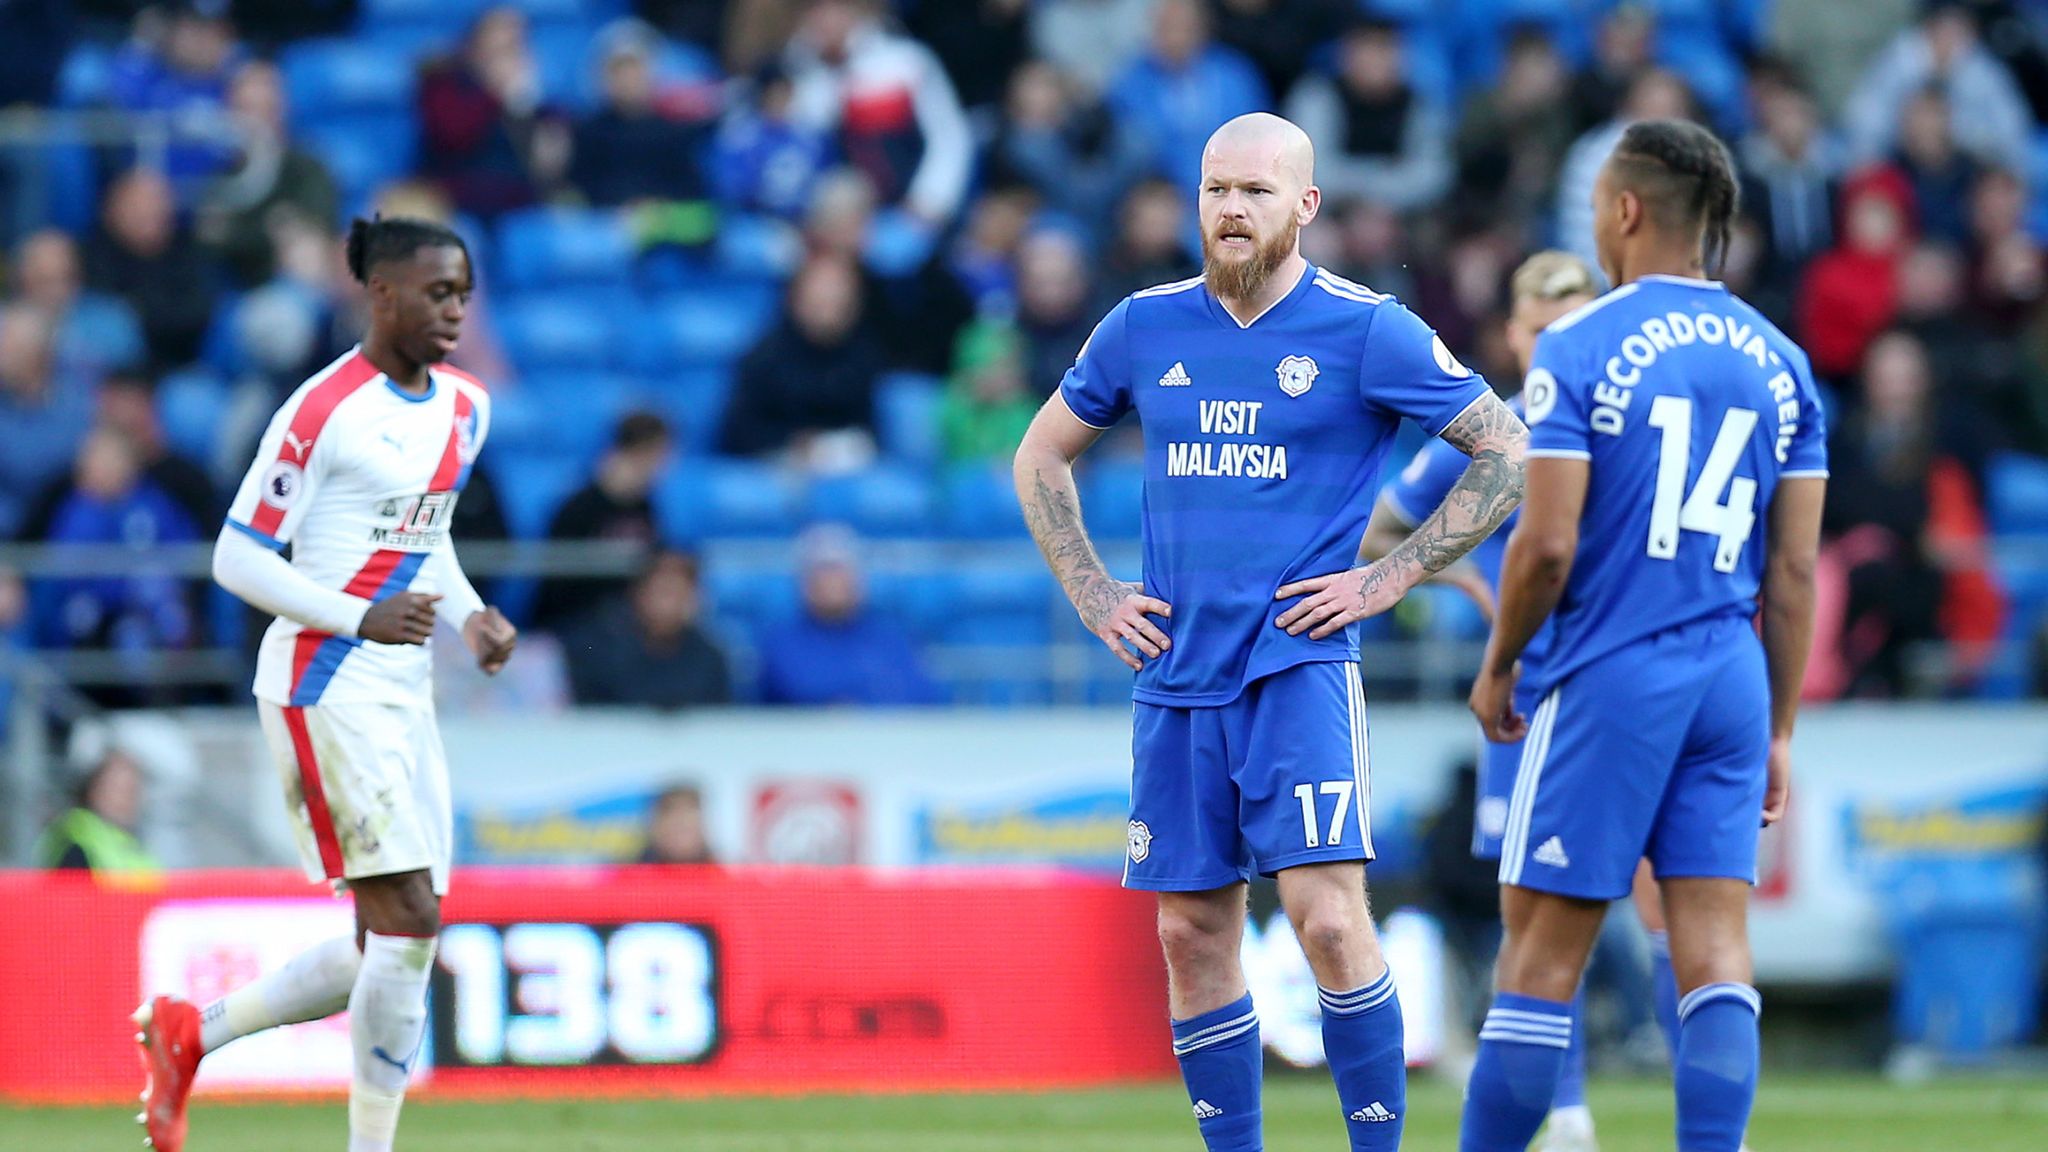 Cardiff City 2018-19 season: Fixtures, transfers, squad numbers